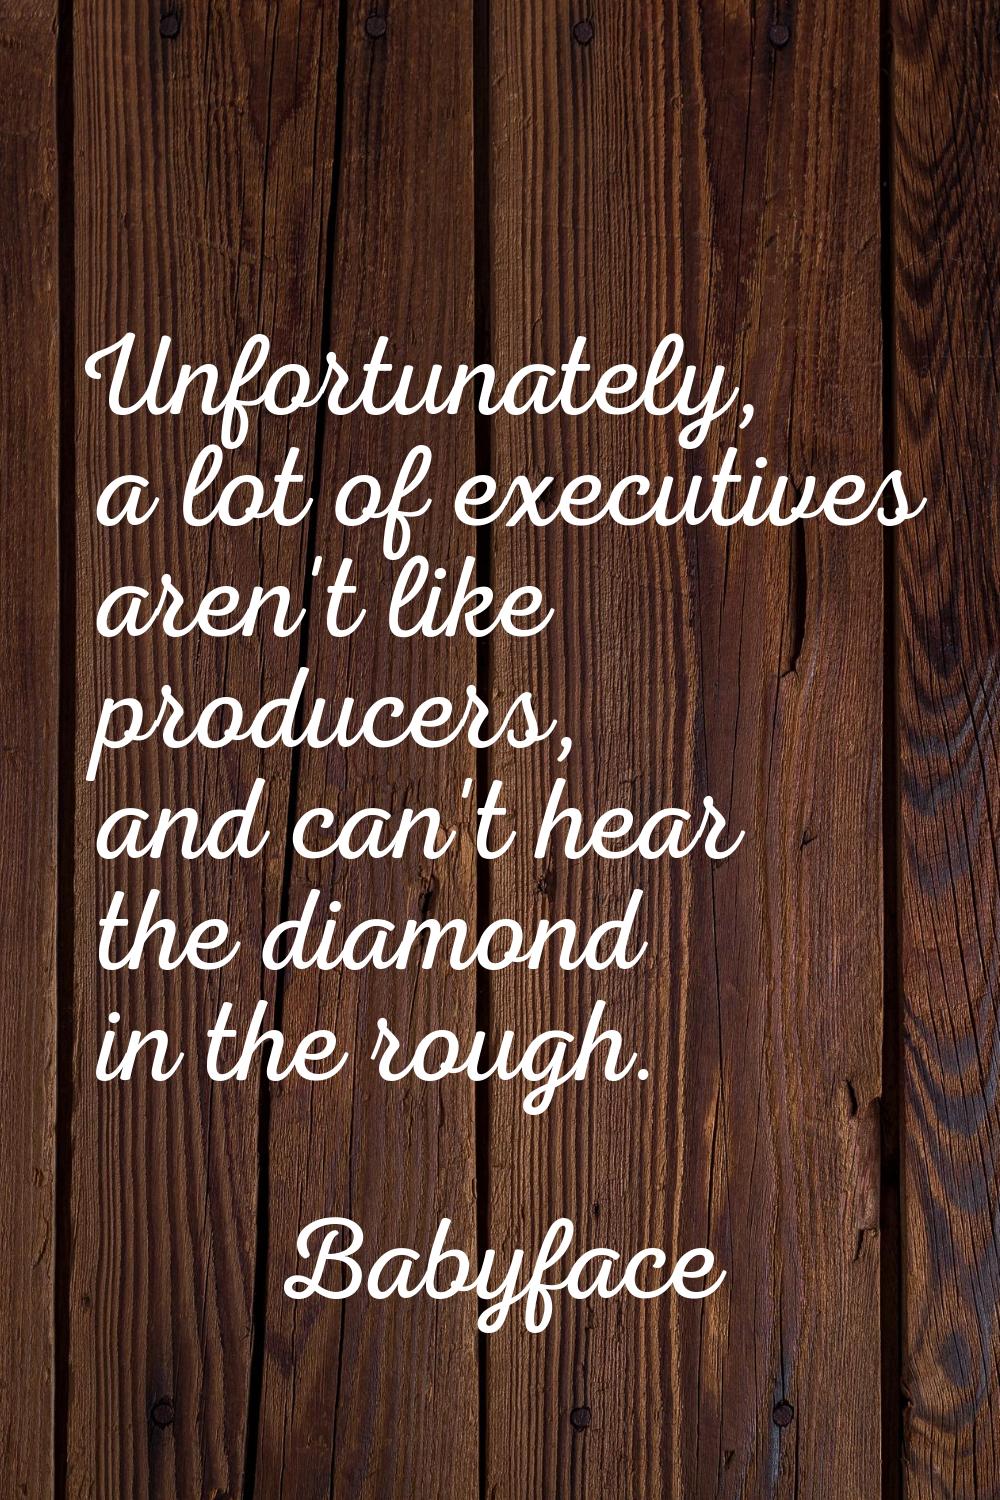 Unfortunately, a lot of executives aren't like producers, and can't hear the diamond in the rough.